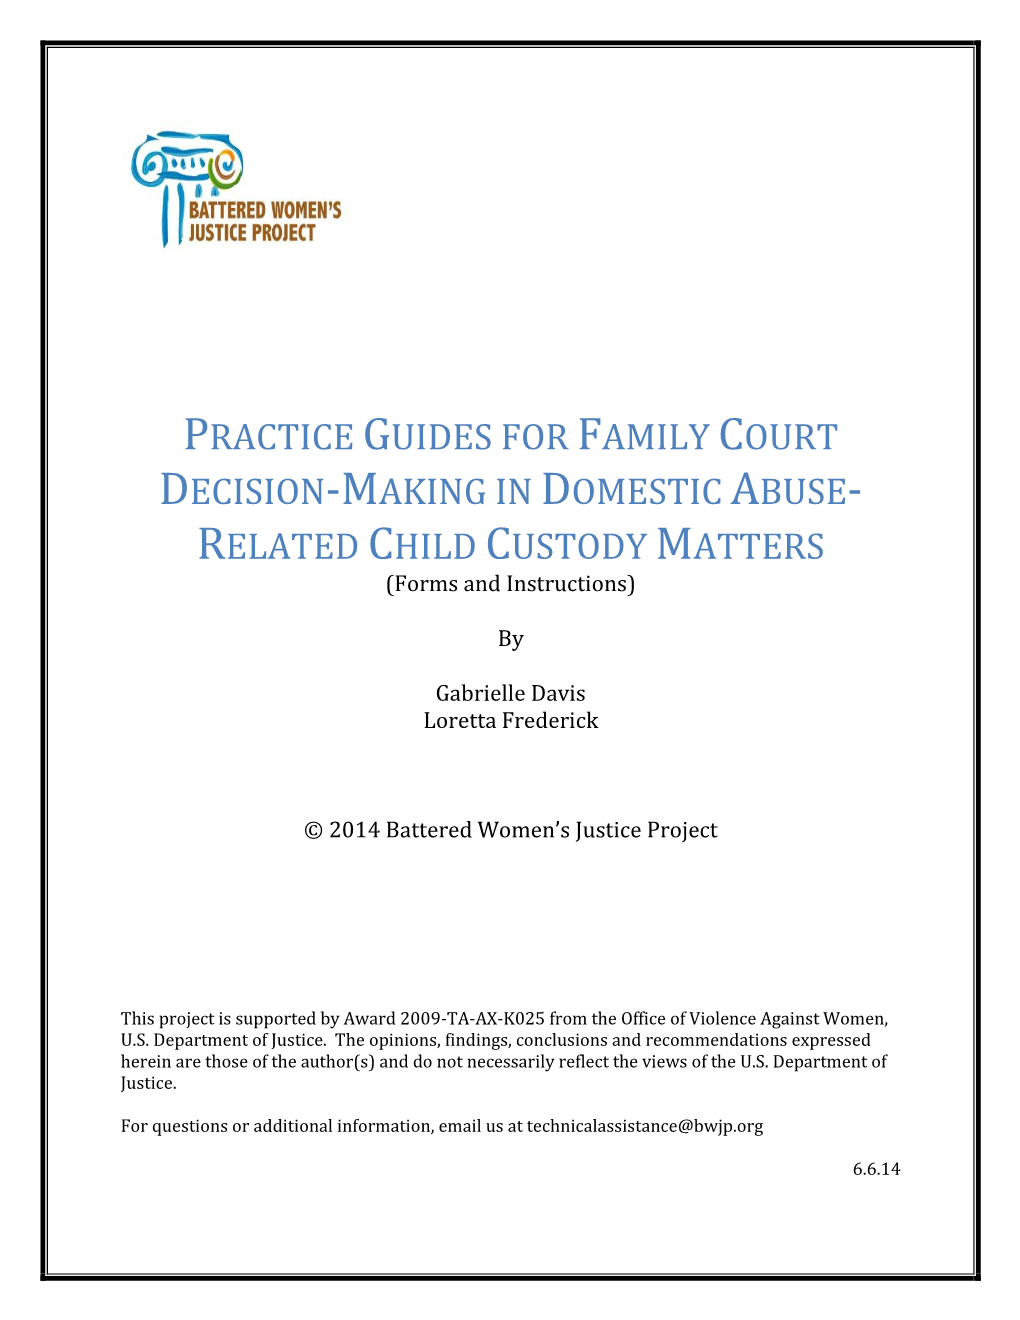 PRACTICE GUIDES for FAMILY COURT DECISION-MAKING in DOMESTIC ABUSE- RELATED CHILD CUSTODY MATTERS (Forms and Instructions)